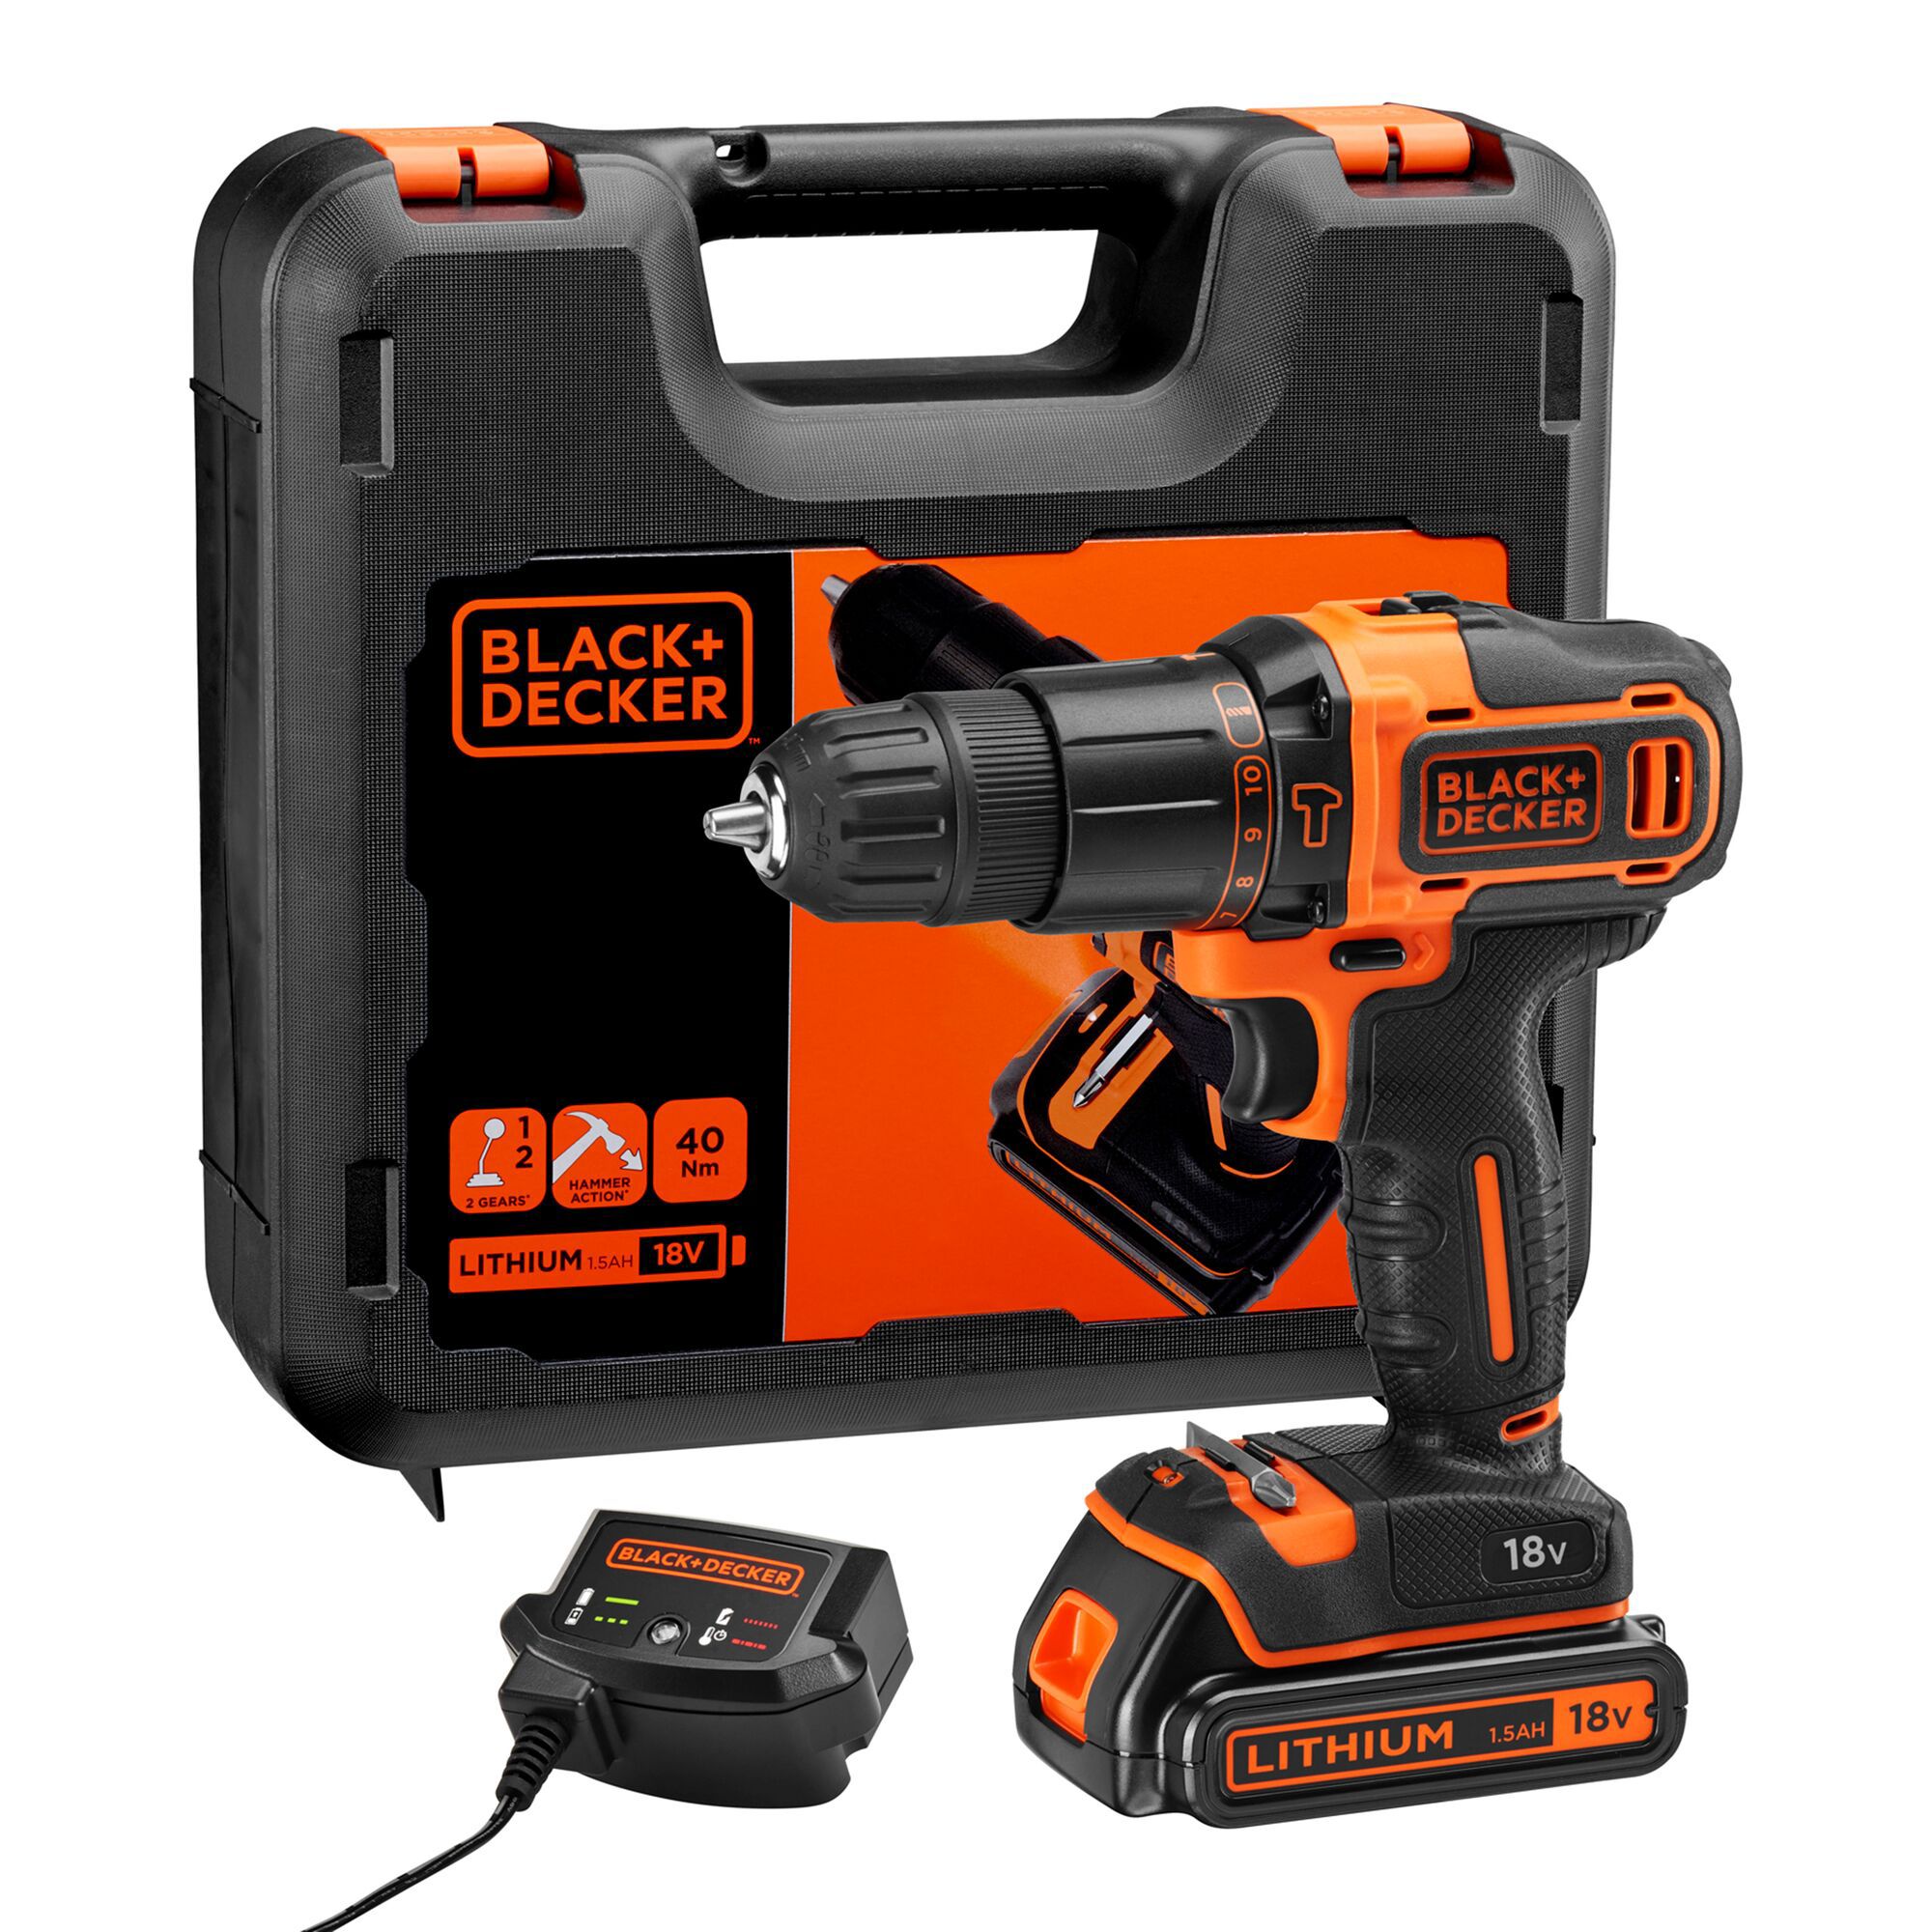 Black and Decker SS18SB-2 SmartSelect 18V Drill Driver Review